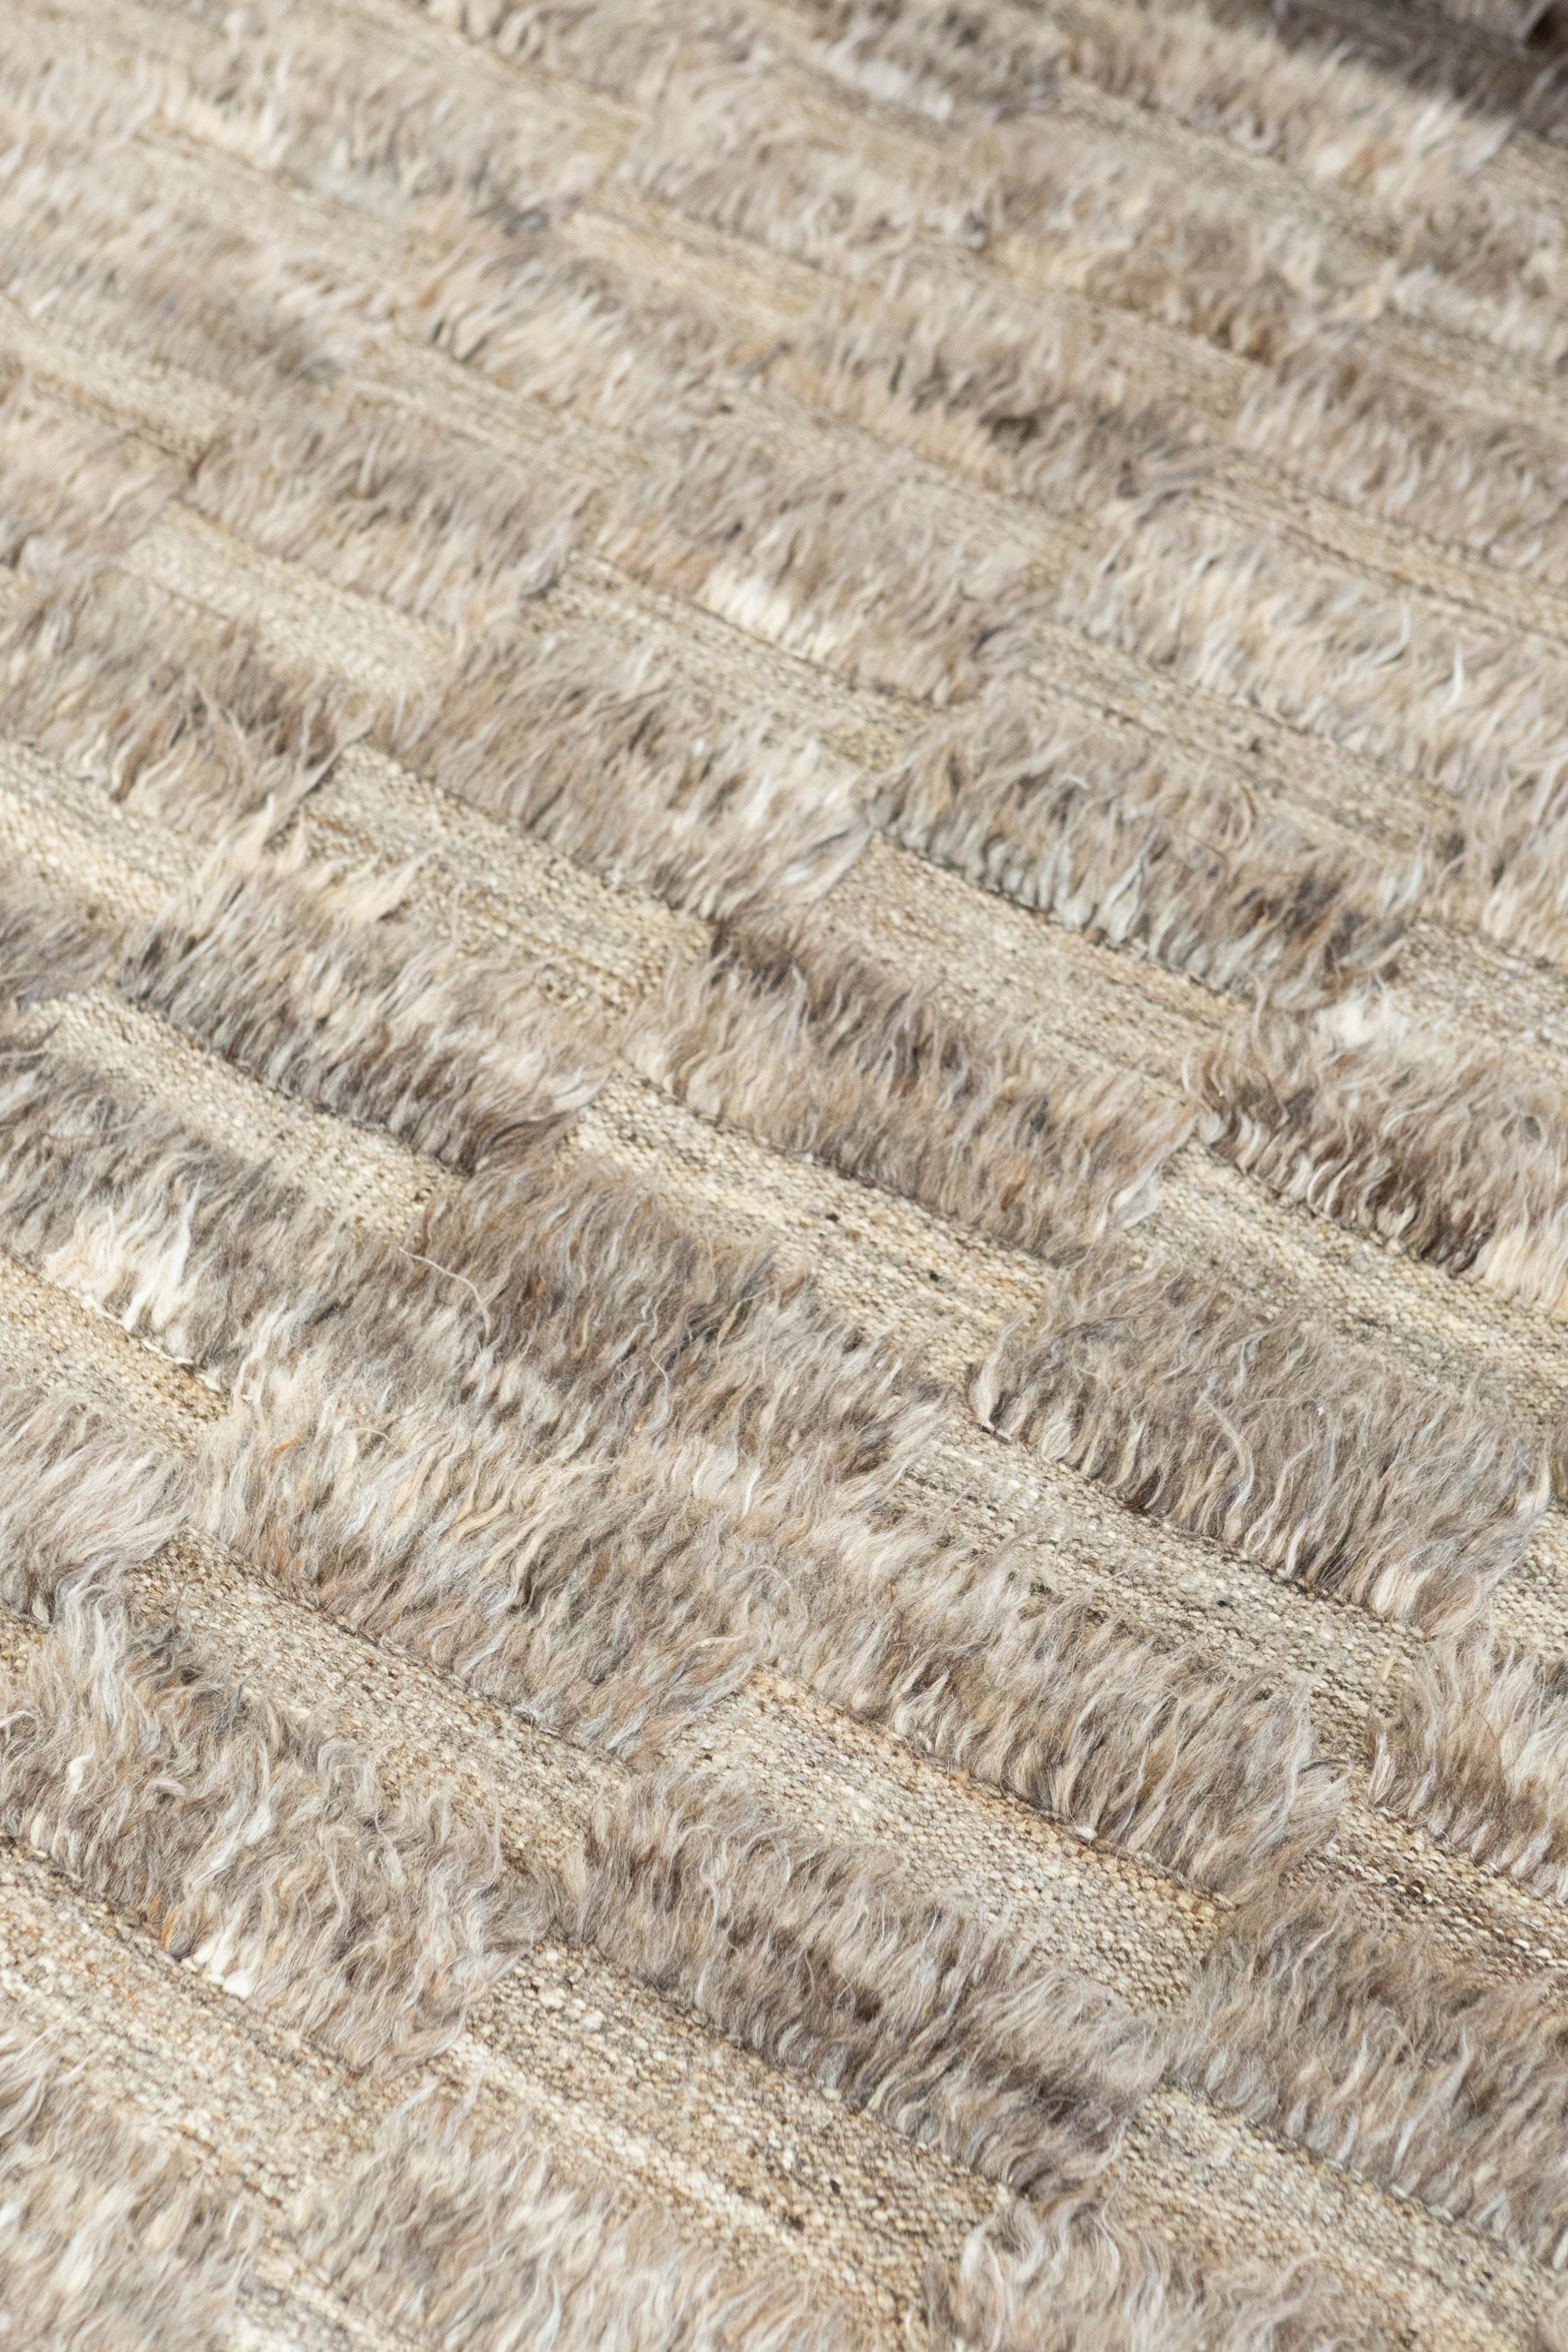 Sirocco' is a stunning handwoven fog colored rug with embossed detailing in a checkered pattern atop a pile weave. Beautiful tassels and bordered designs add a timely and one of a kind essence for the modern design world. Haute Bohemian collection: